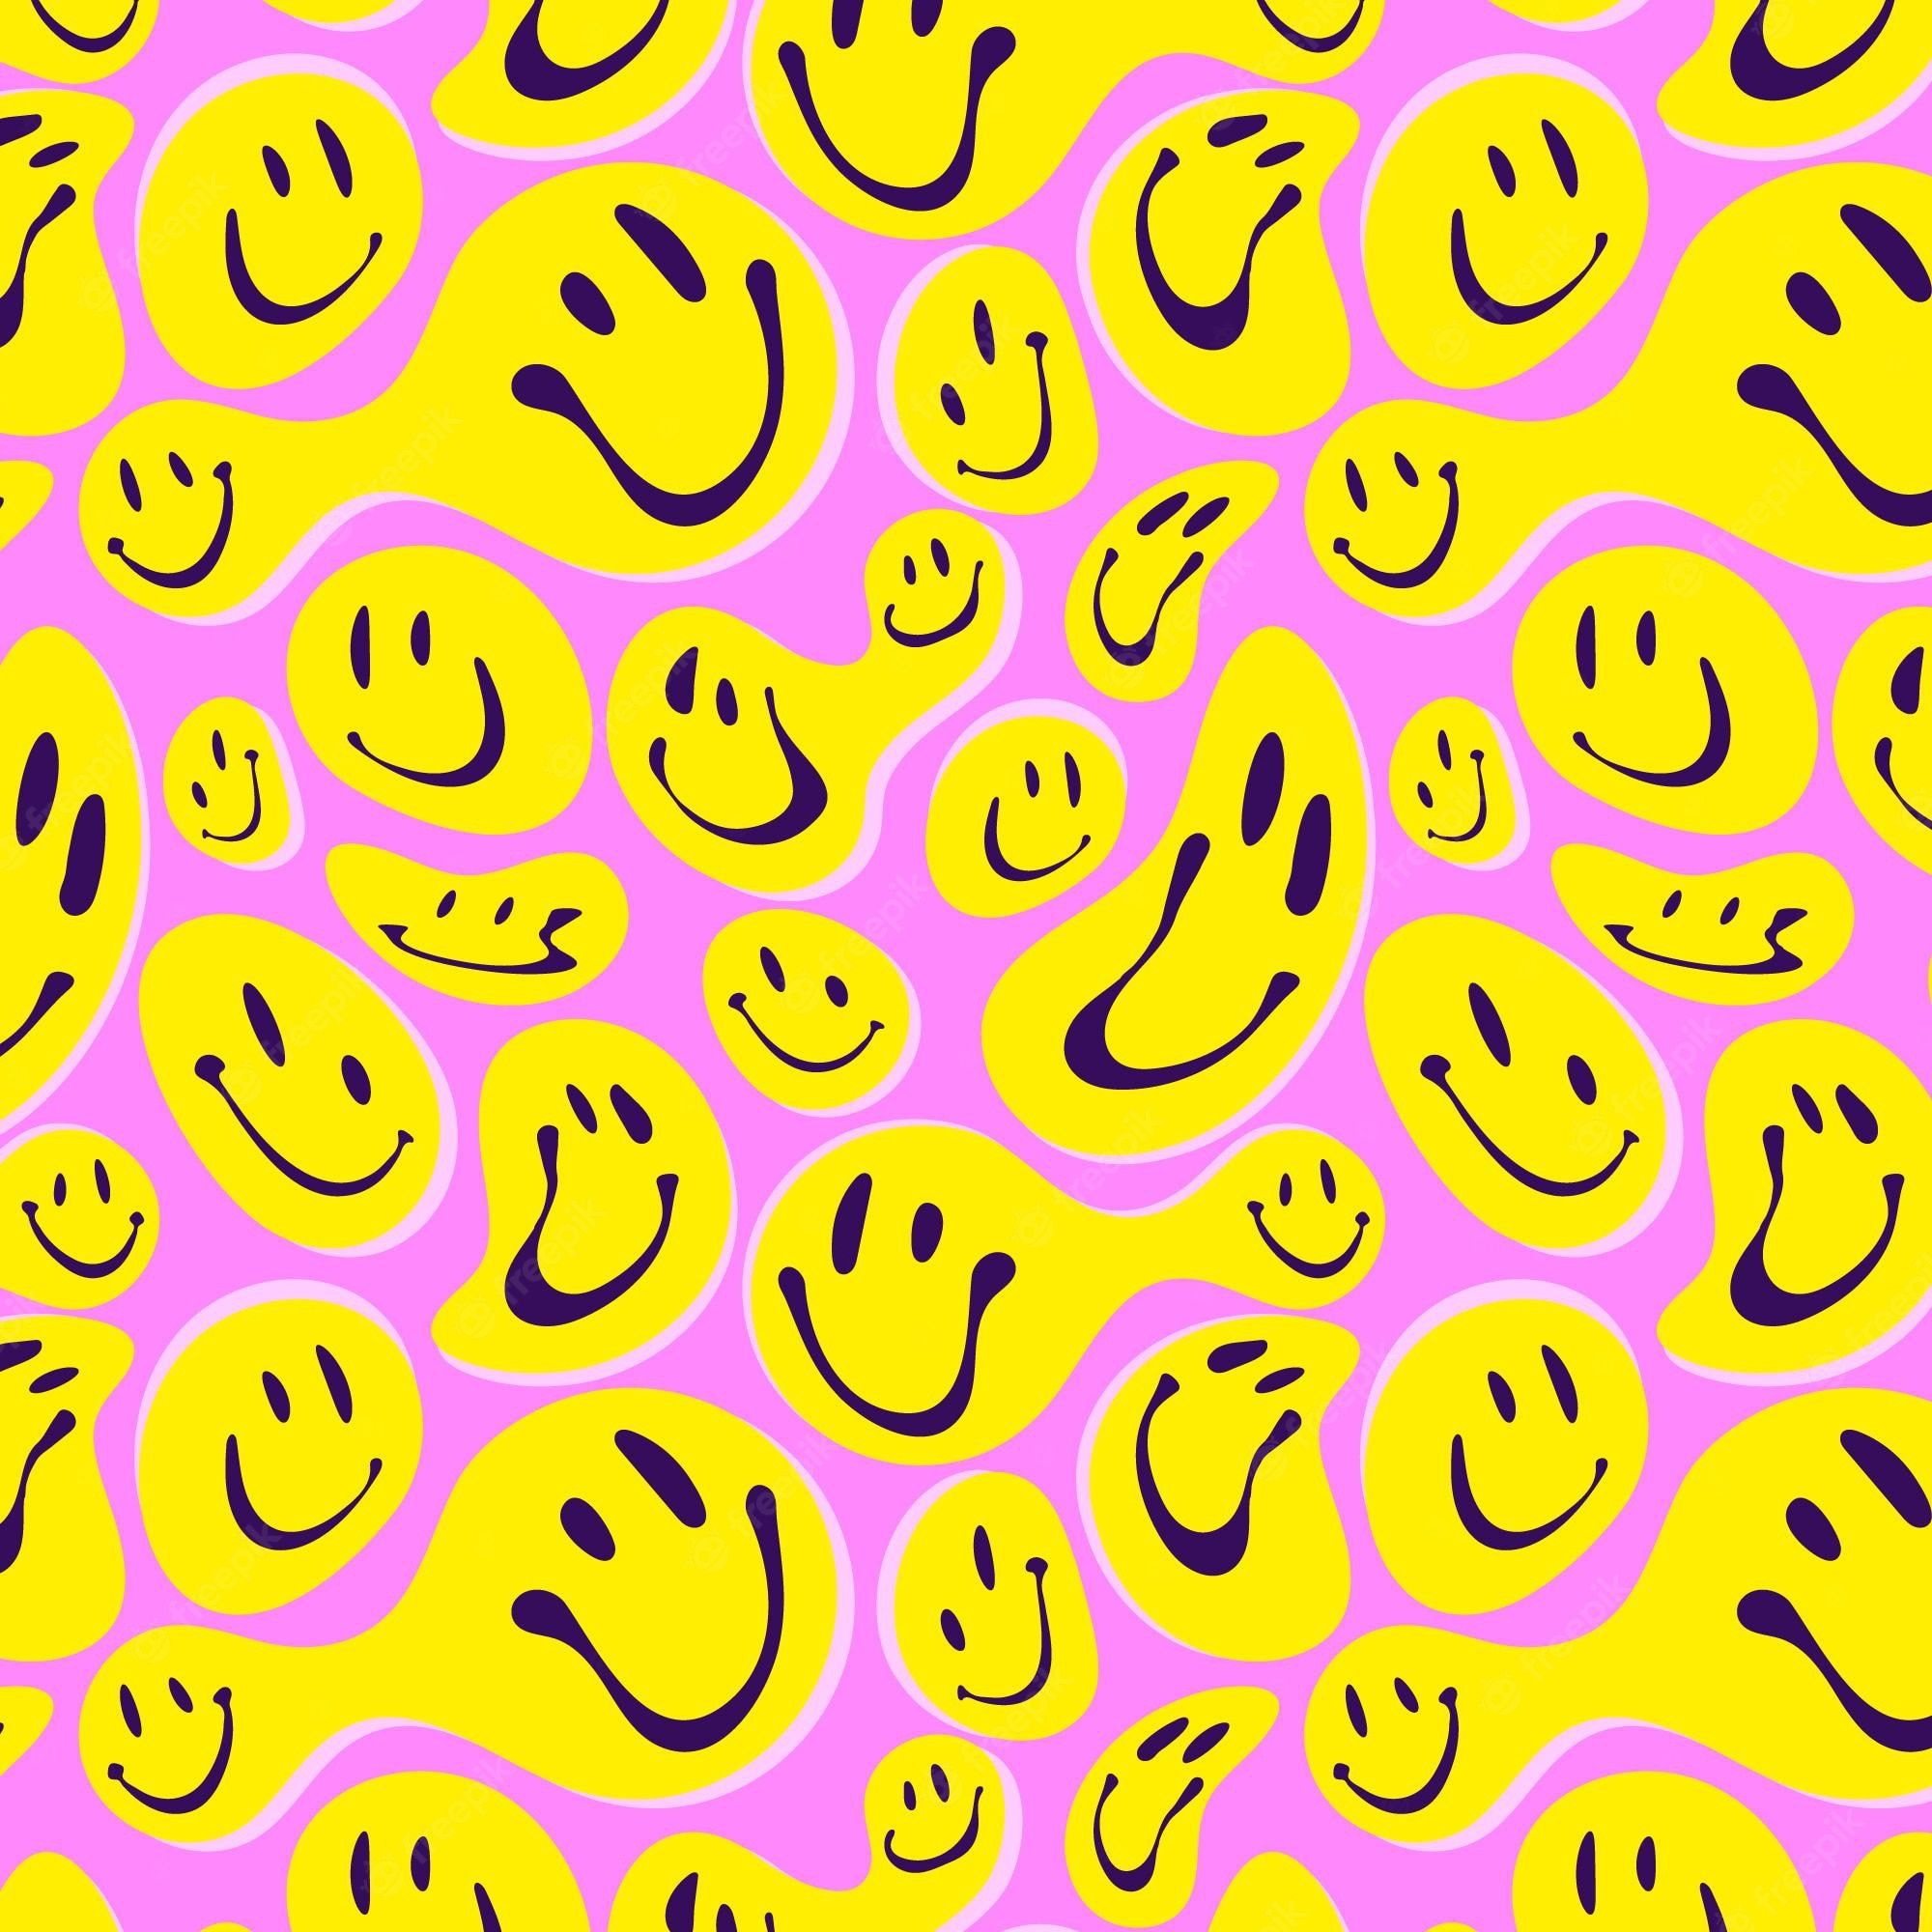 A pattern of yellow and purple smiley faces - Smile